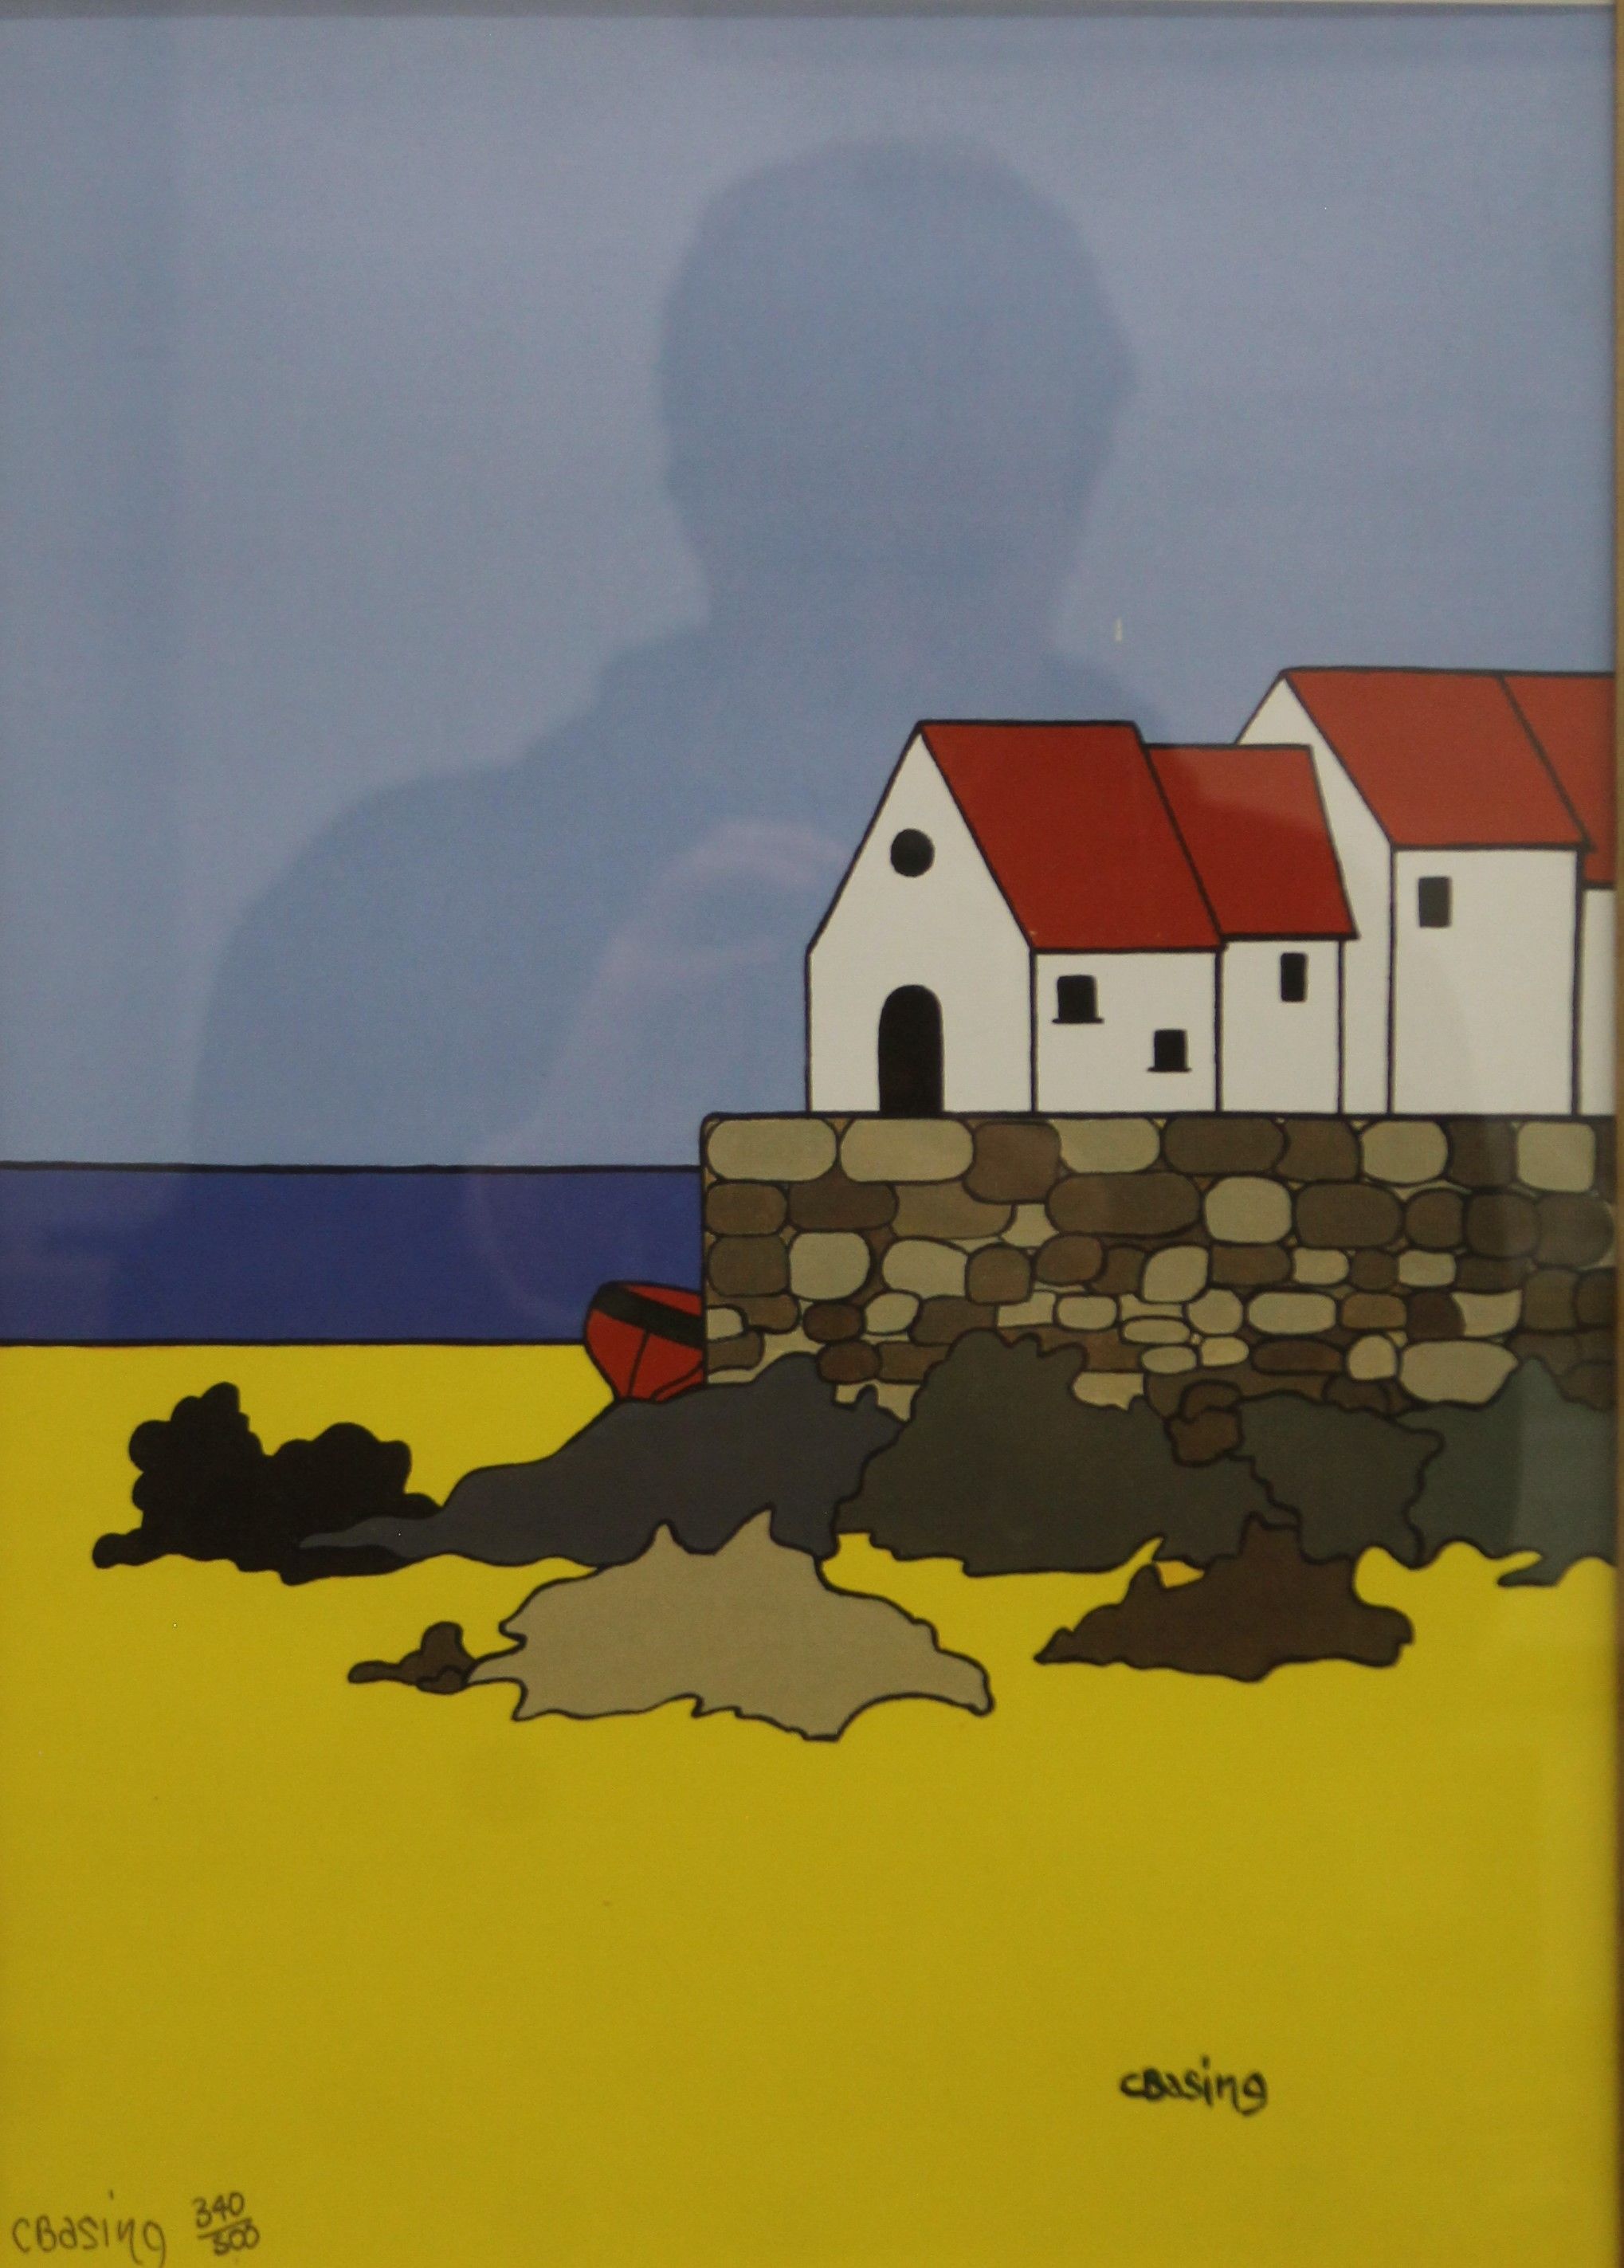 C BASING, Beach Scene, limited edition print, numbered 340/500, framed and glazed. 28.5 x 40 cm.